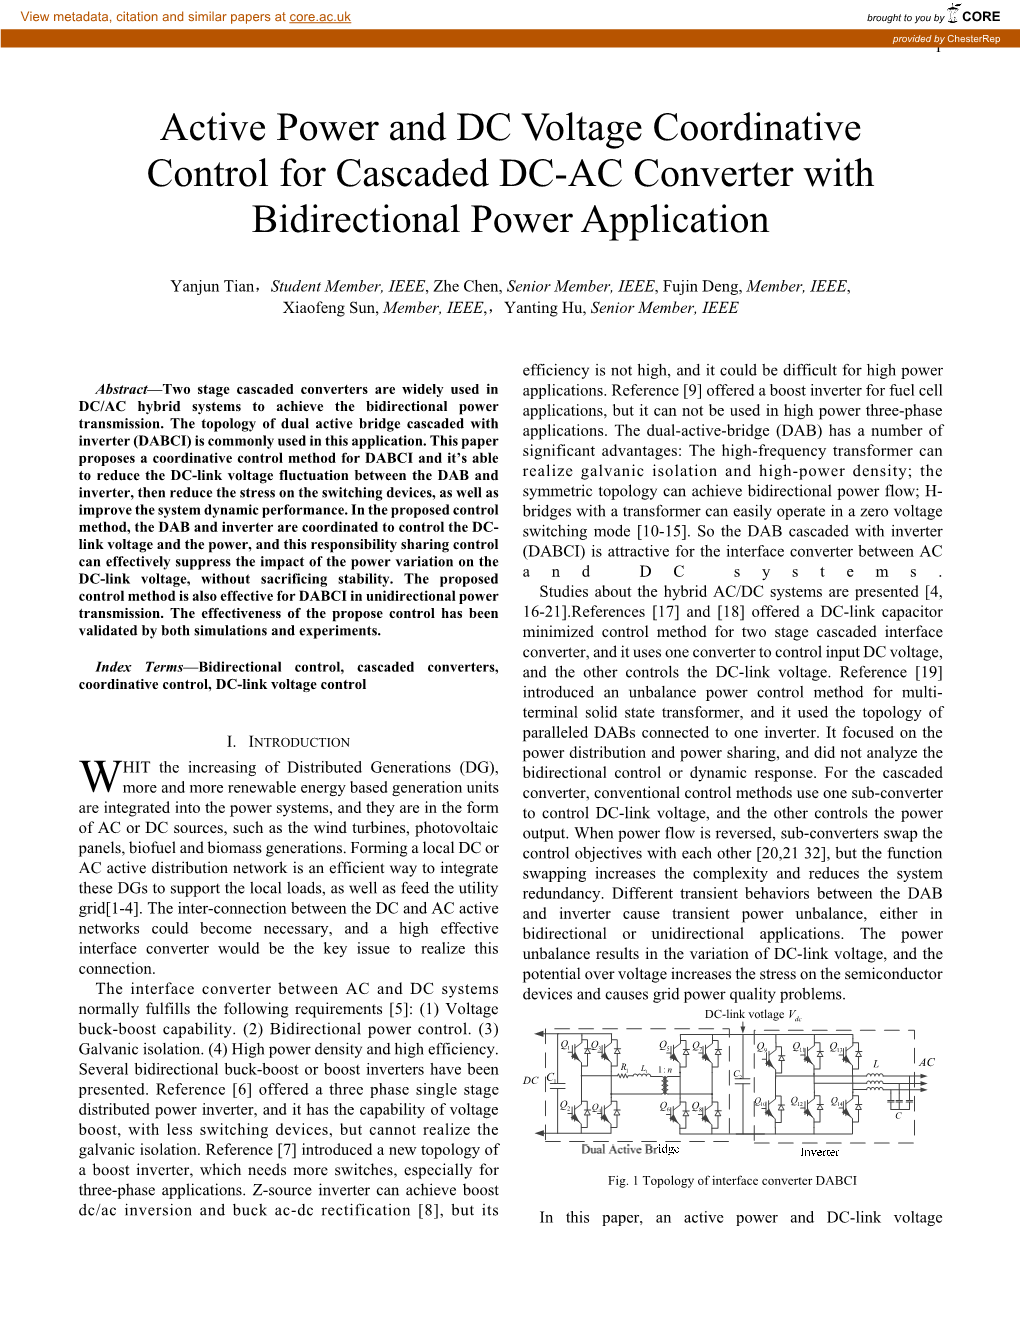 Active Power and DC Voltage Coordinative Control for Cascaded DC-AC Converter with Bidirectional Power Application